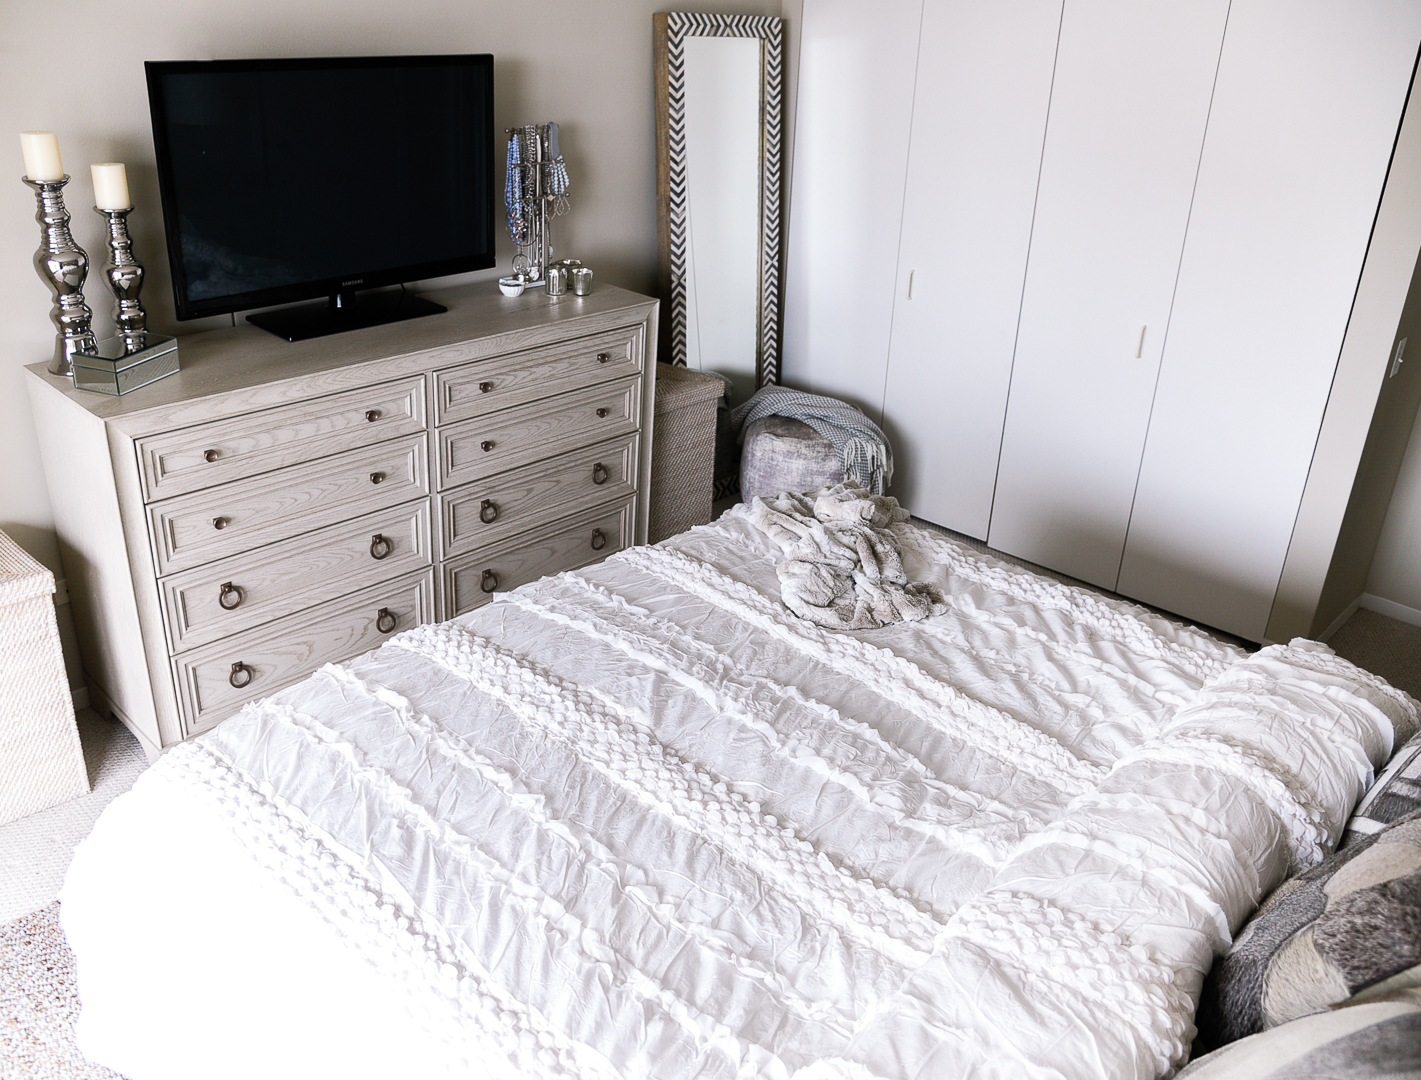 Pretty white textured bedding. - Our Master Bedroom Linen Refresh with Home Decorators by Chicago style blogger Visions of Vogue